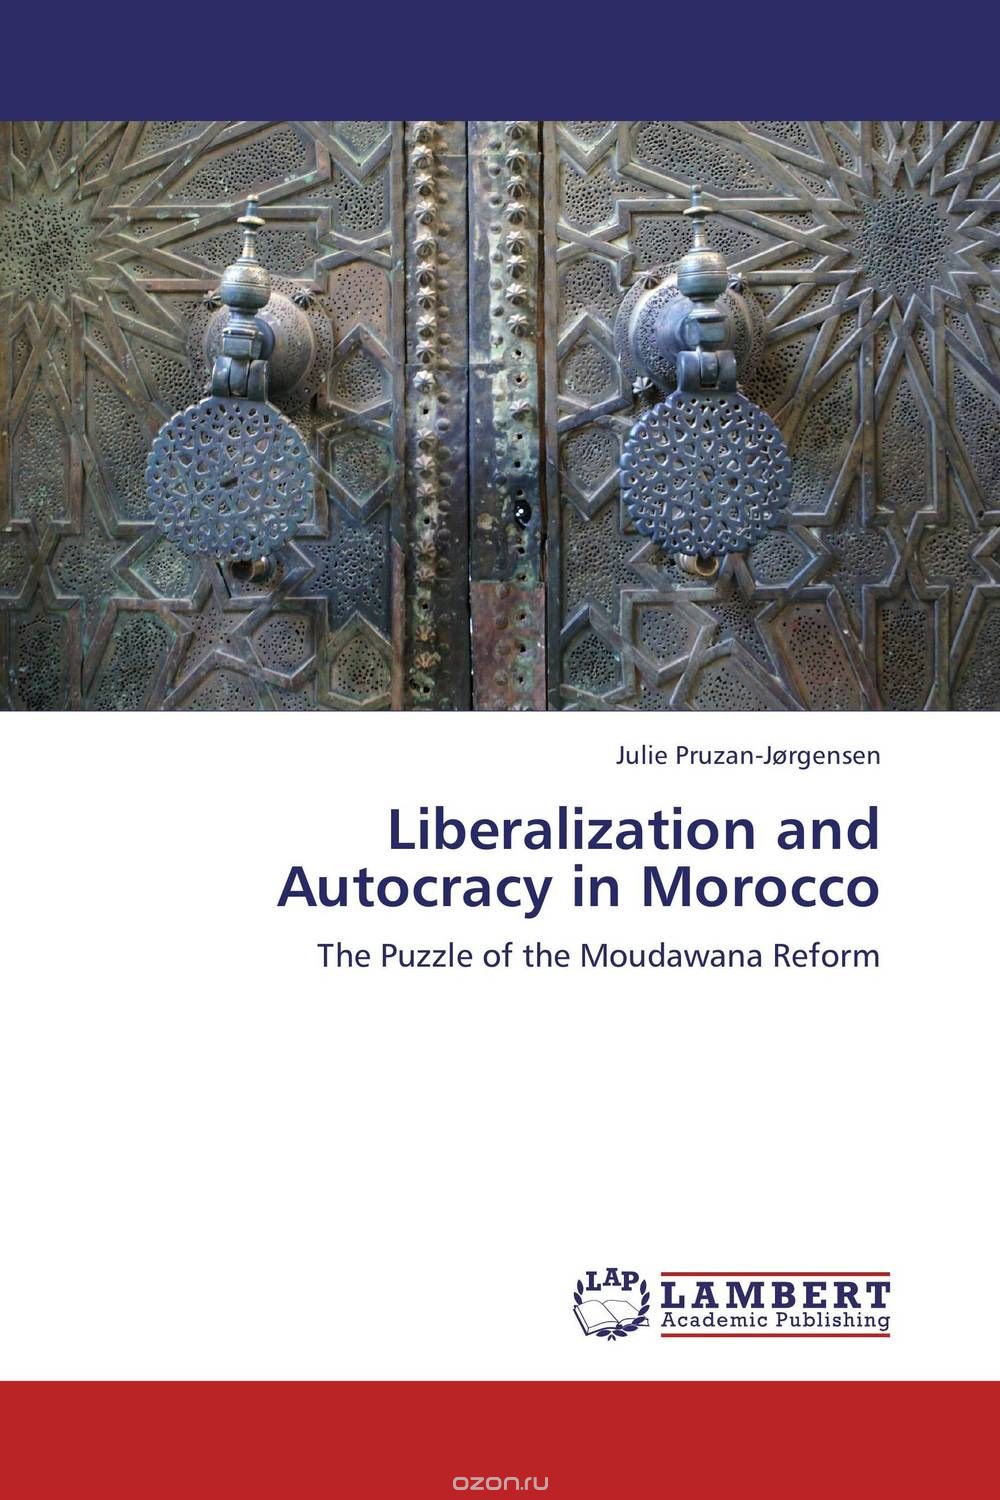 Liberalization and Autocracy in Morocco